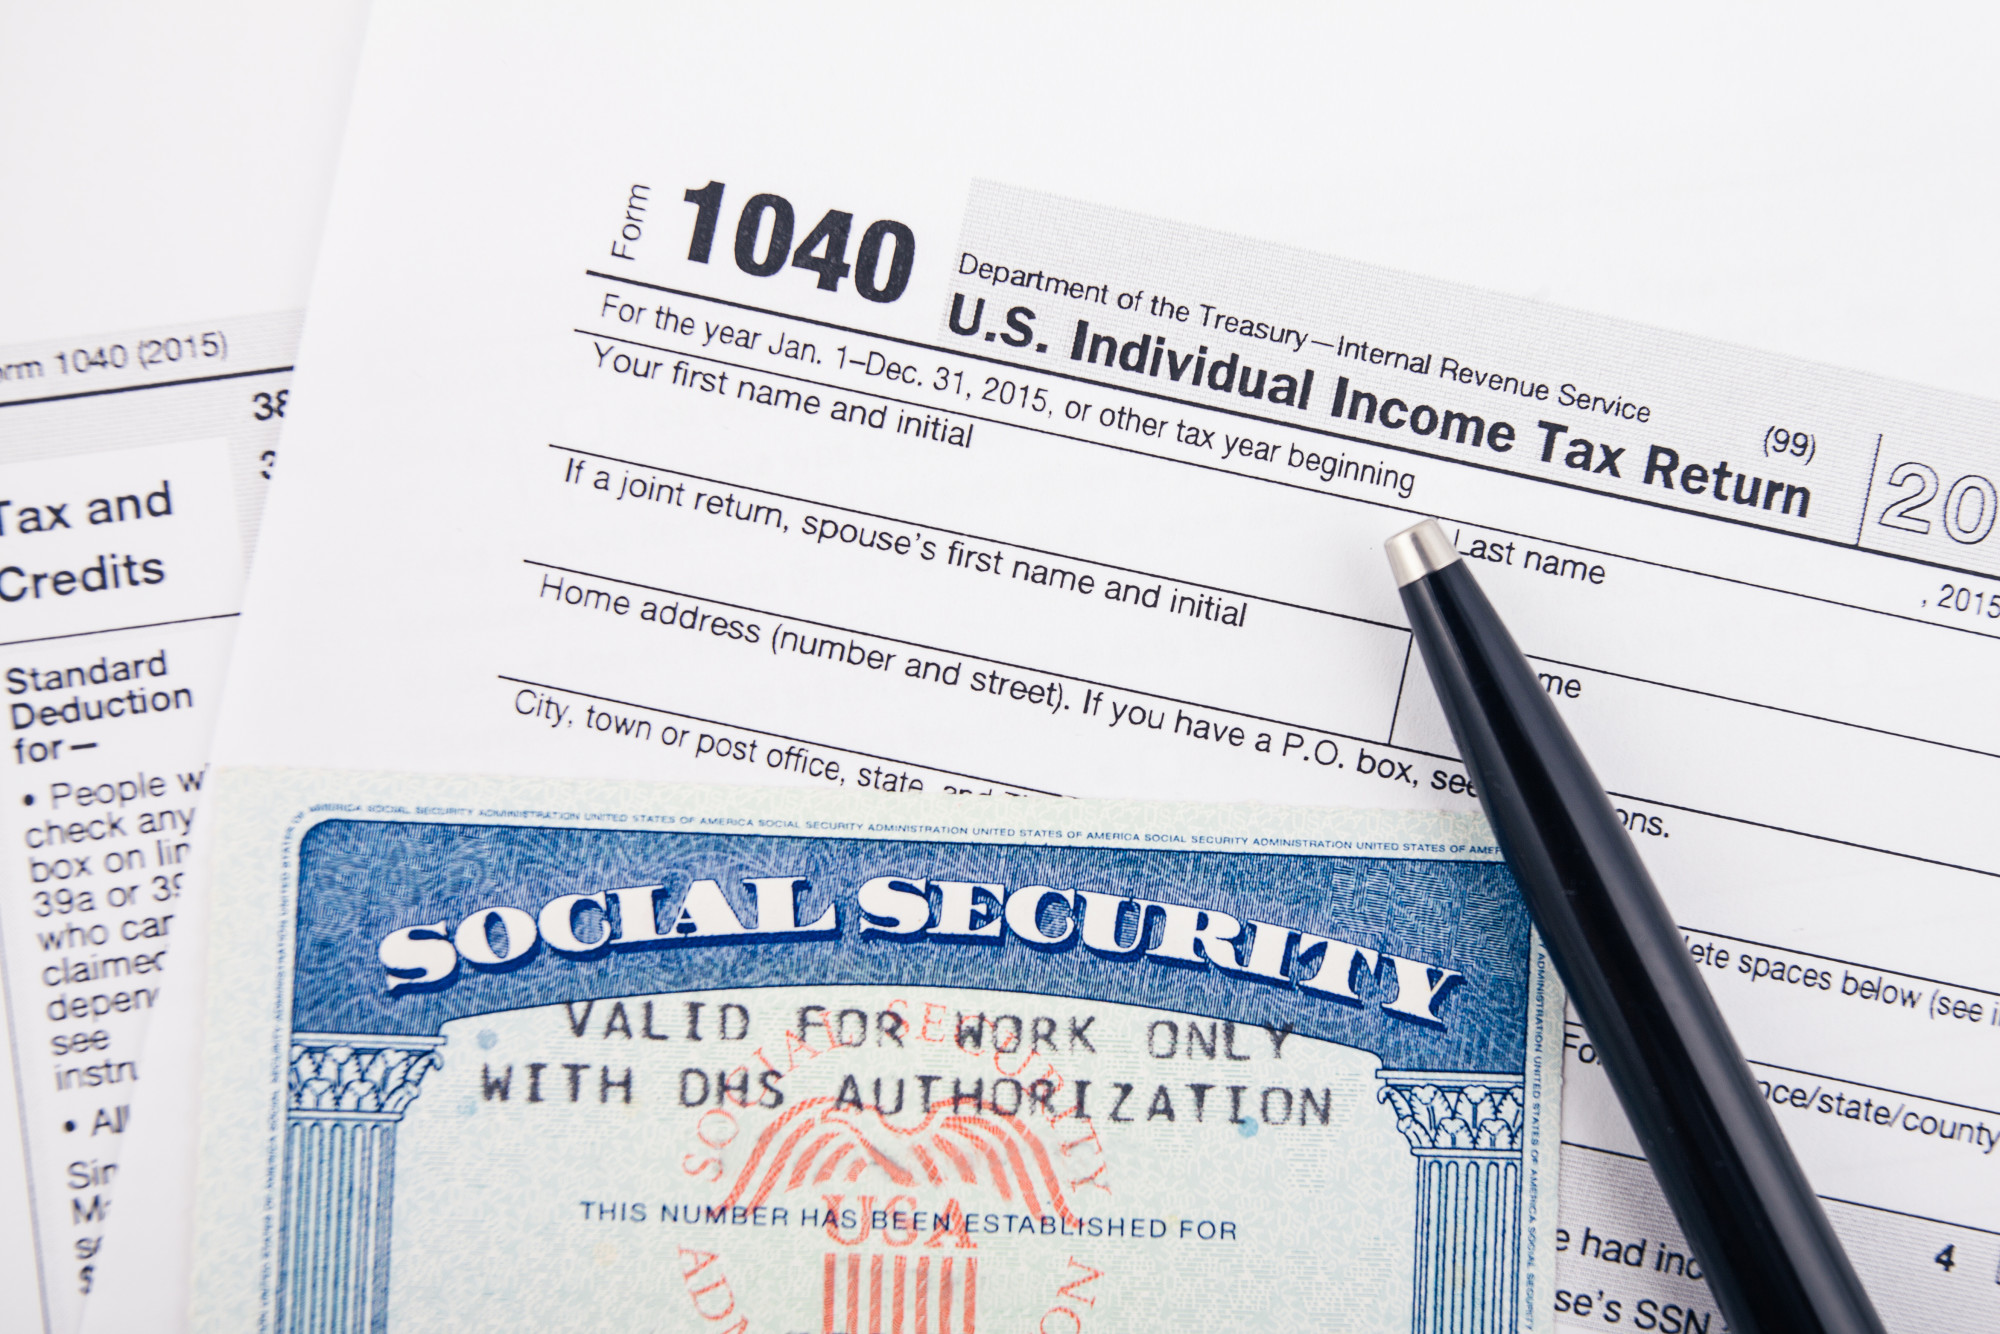 When Is the Last Day to File Taxes?